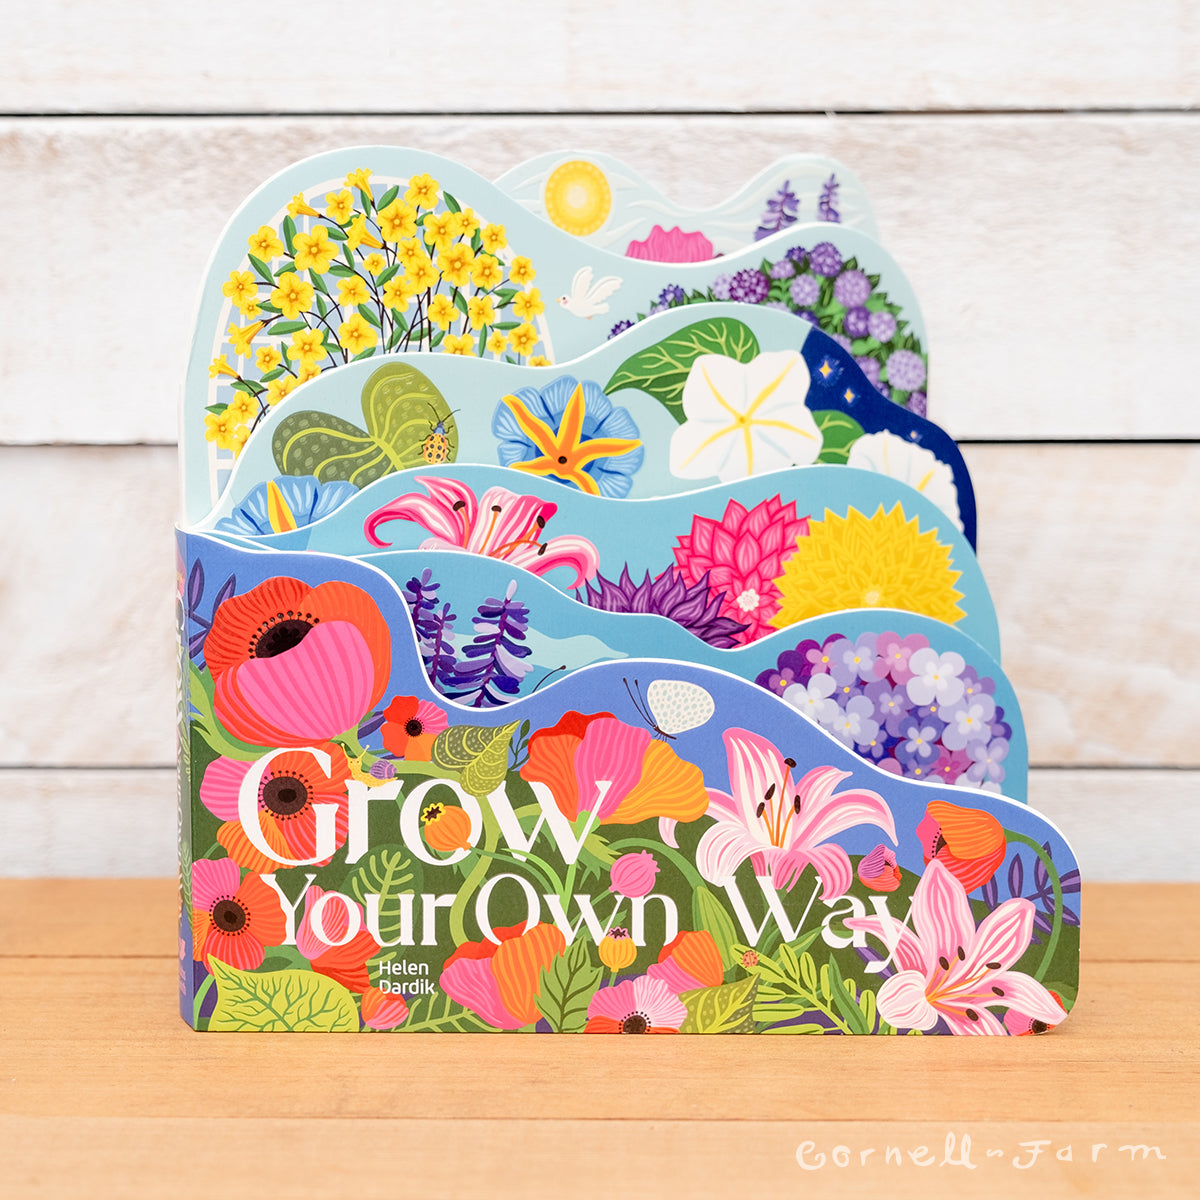 Grow Your Own Way, A Layered View Book